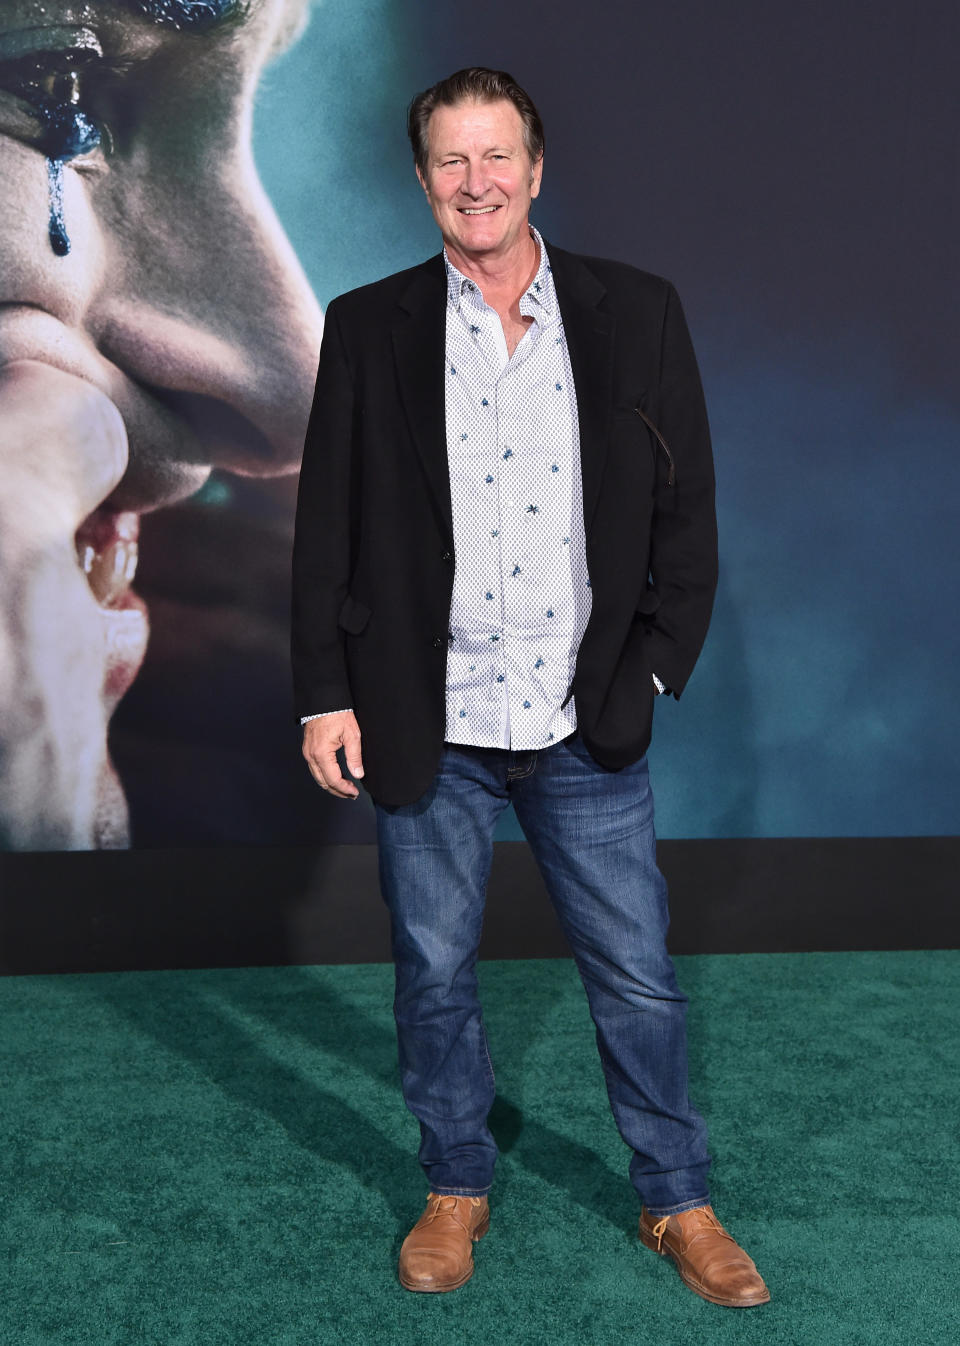 Brett smiles at the Joker premiere, wearing a black blazer jacket over a white shirt with small navy details, dark blue jeans and tan colour shoes